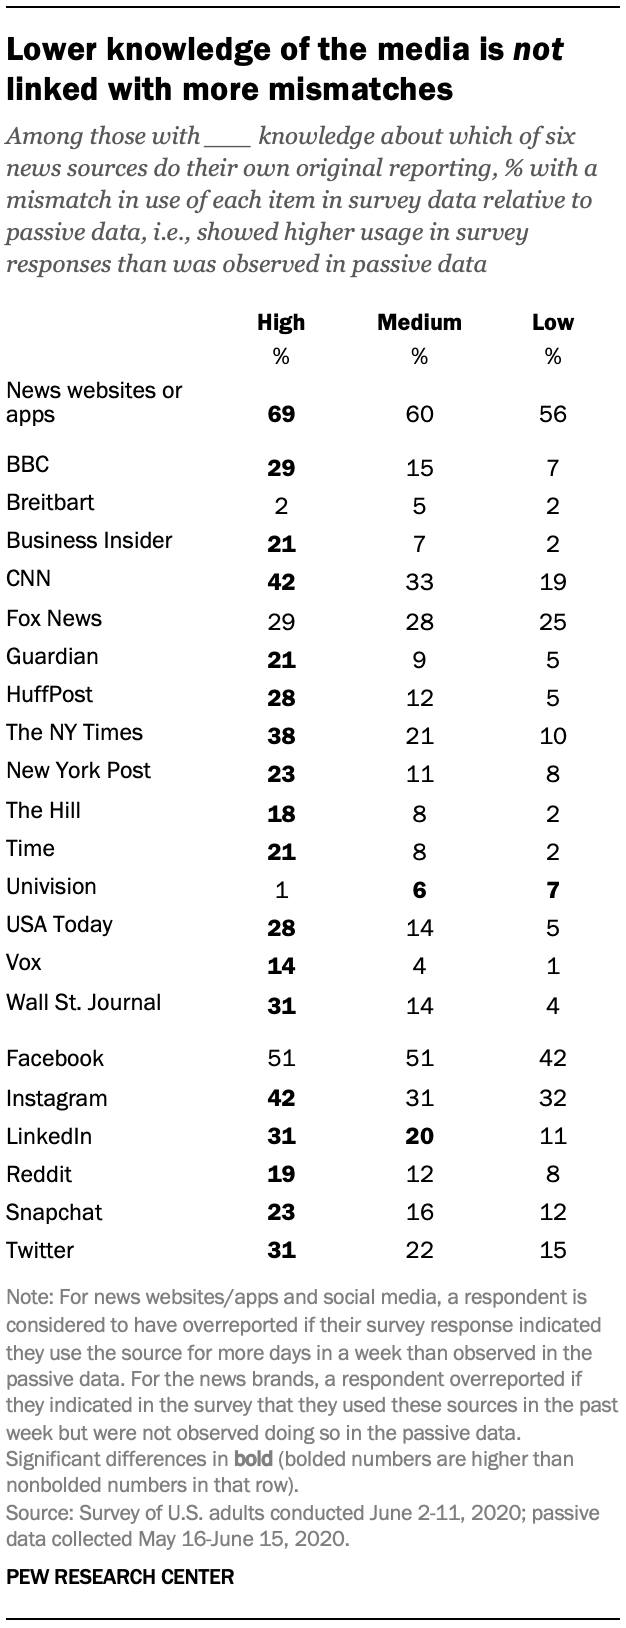 Lower knowledge of the media is not linked with more mismatches